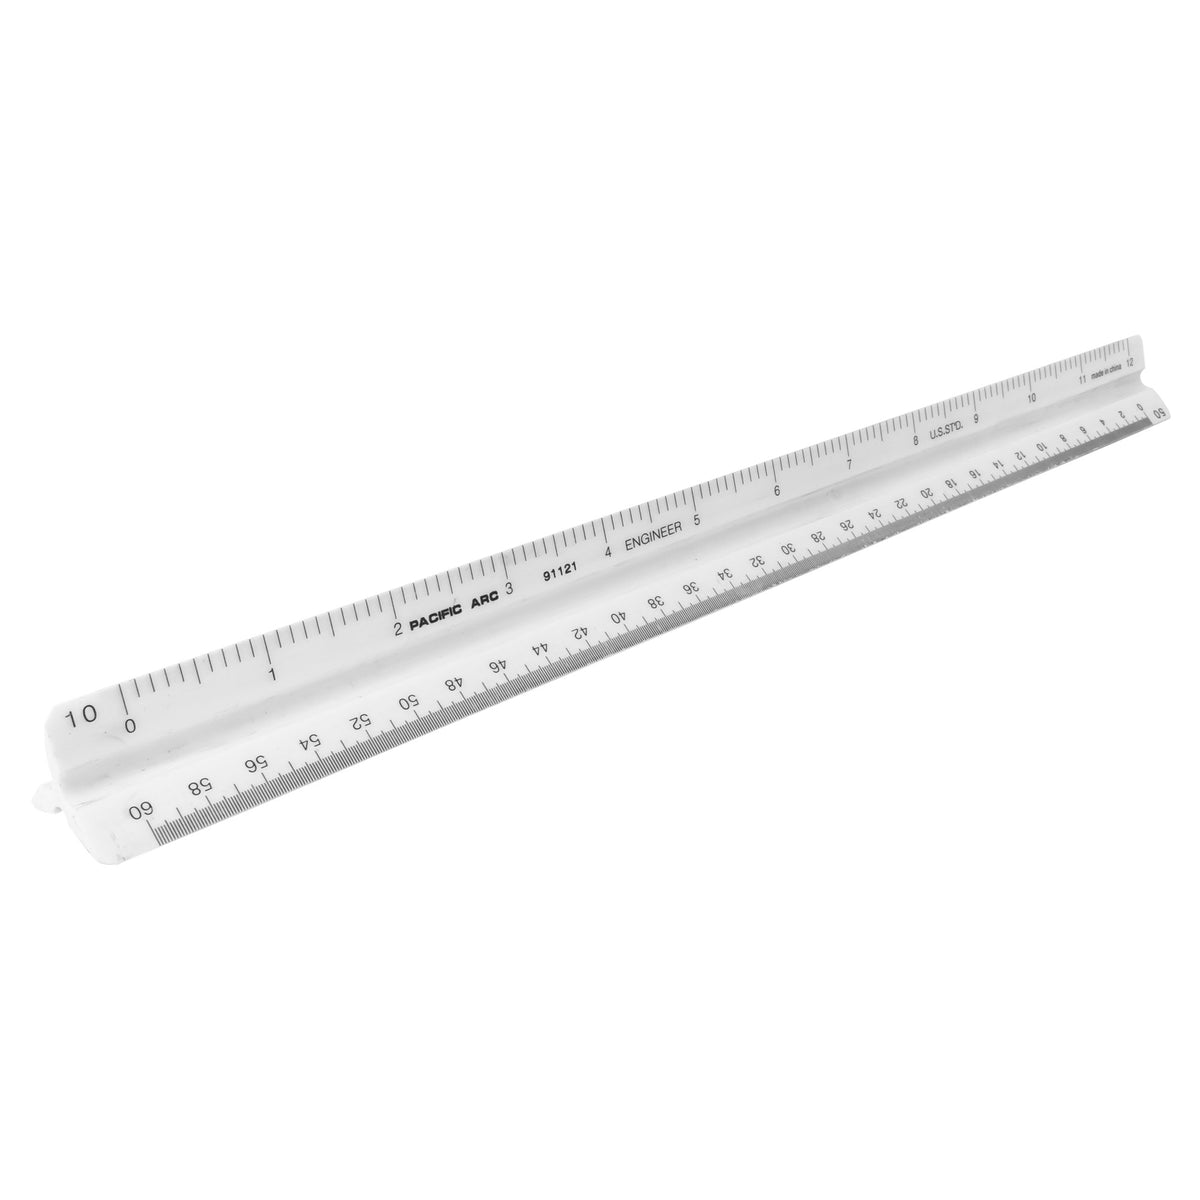 Pacific Arc Stainless Steel Ruler with inch and Pica Measurements, 24 Inches Rubber Backed